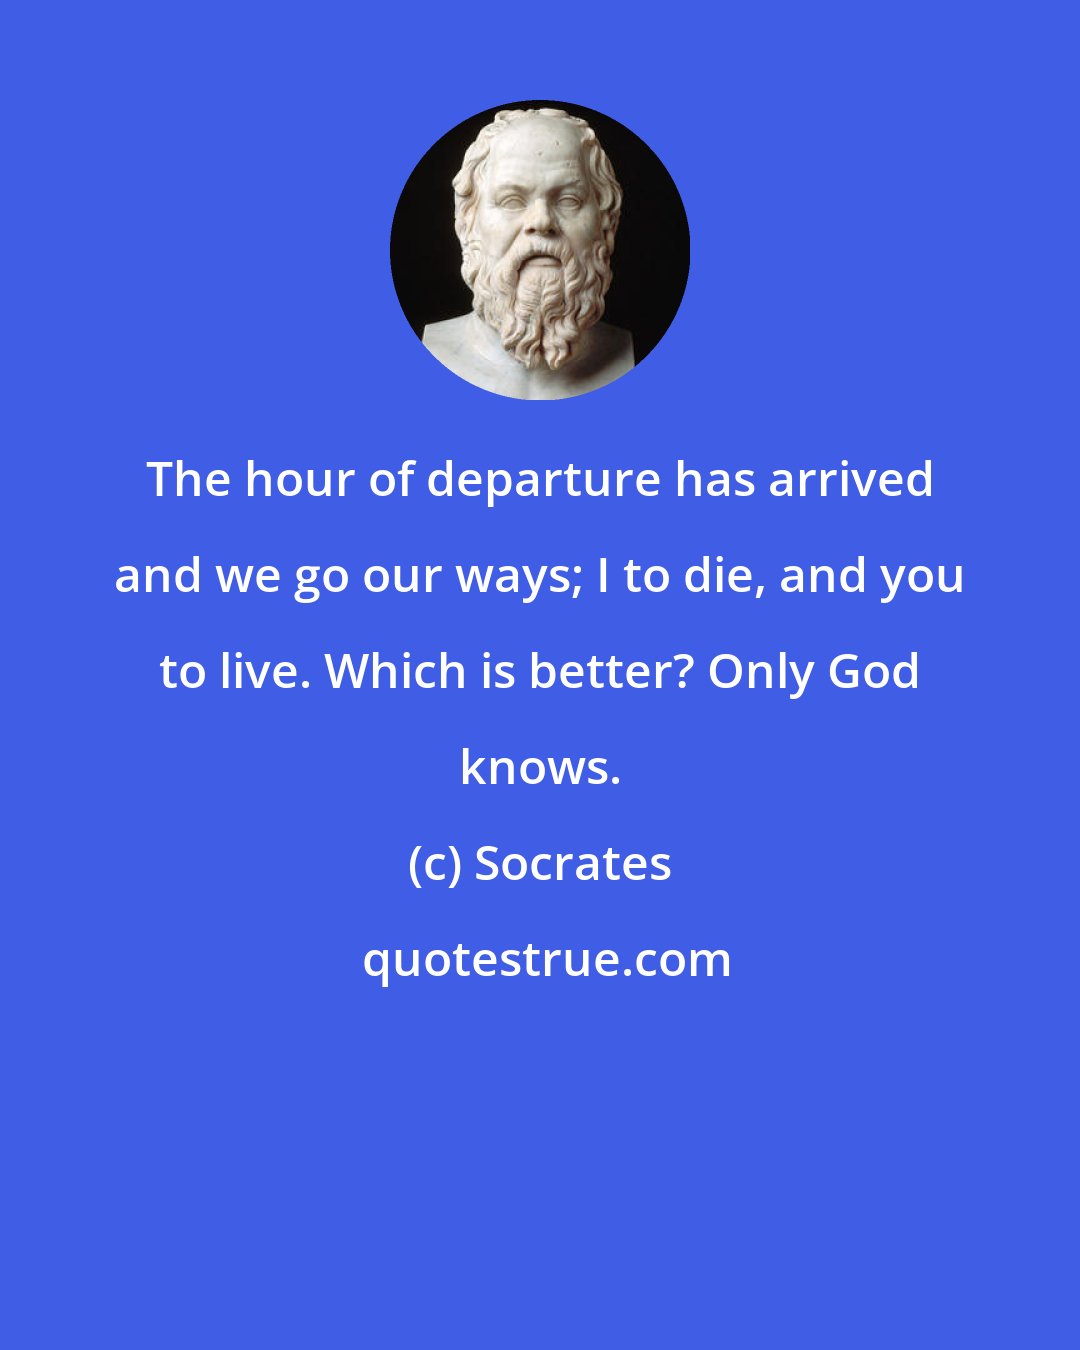 Socrates: The hour of departure has arrived and we go our ways; I to die, and you to live. Which is better? Only God knows.